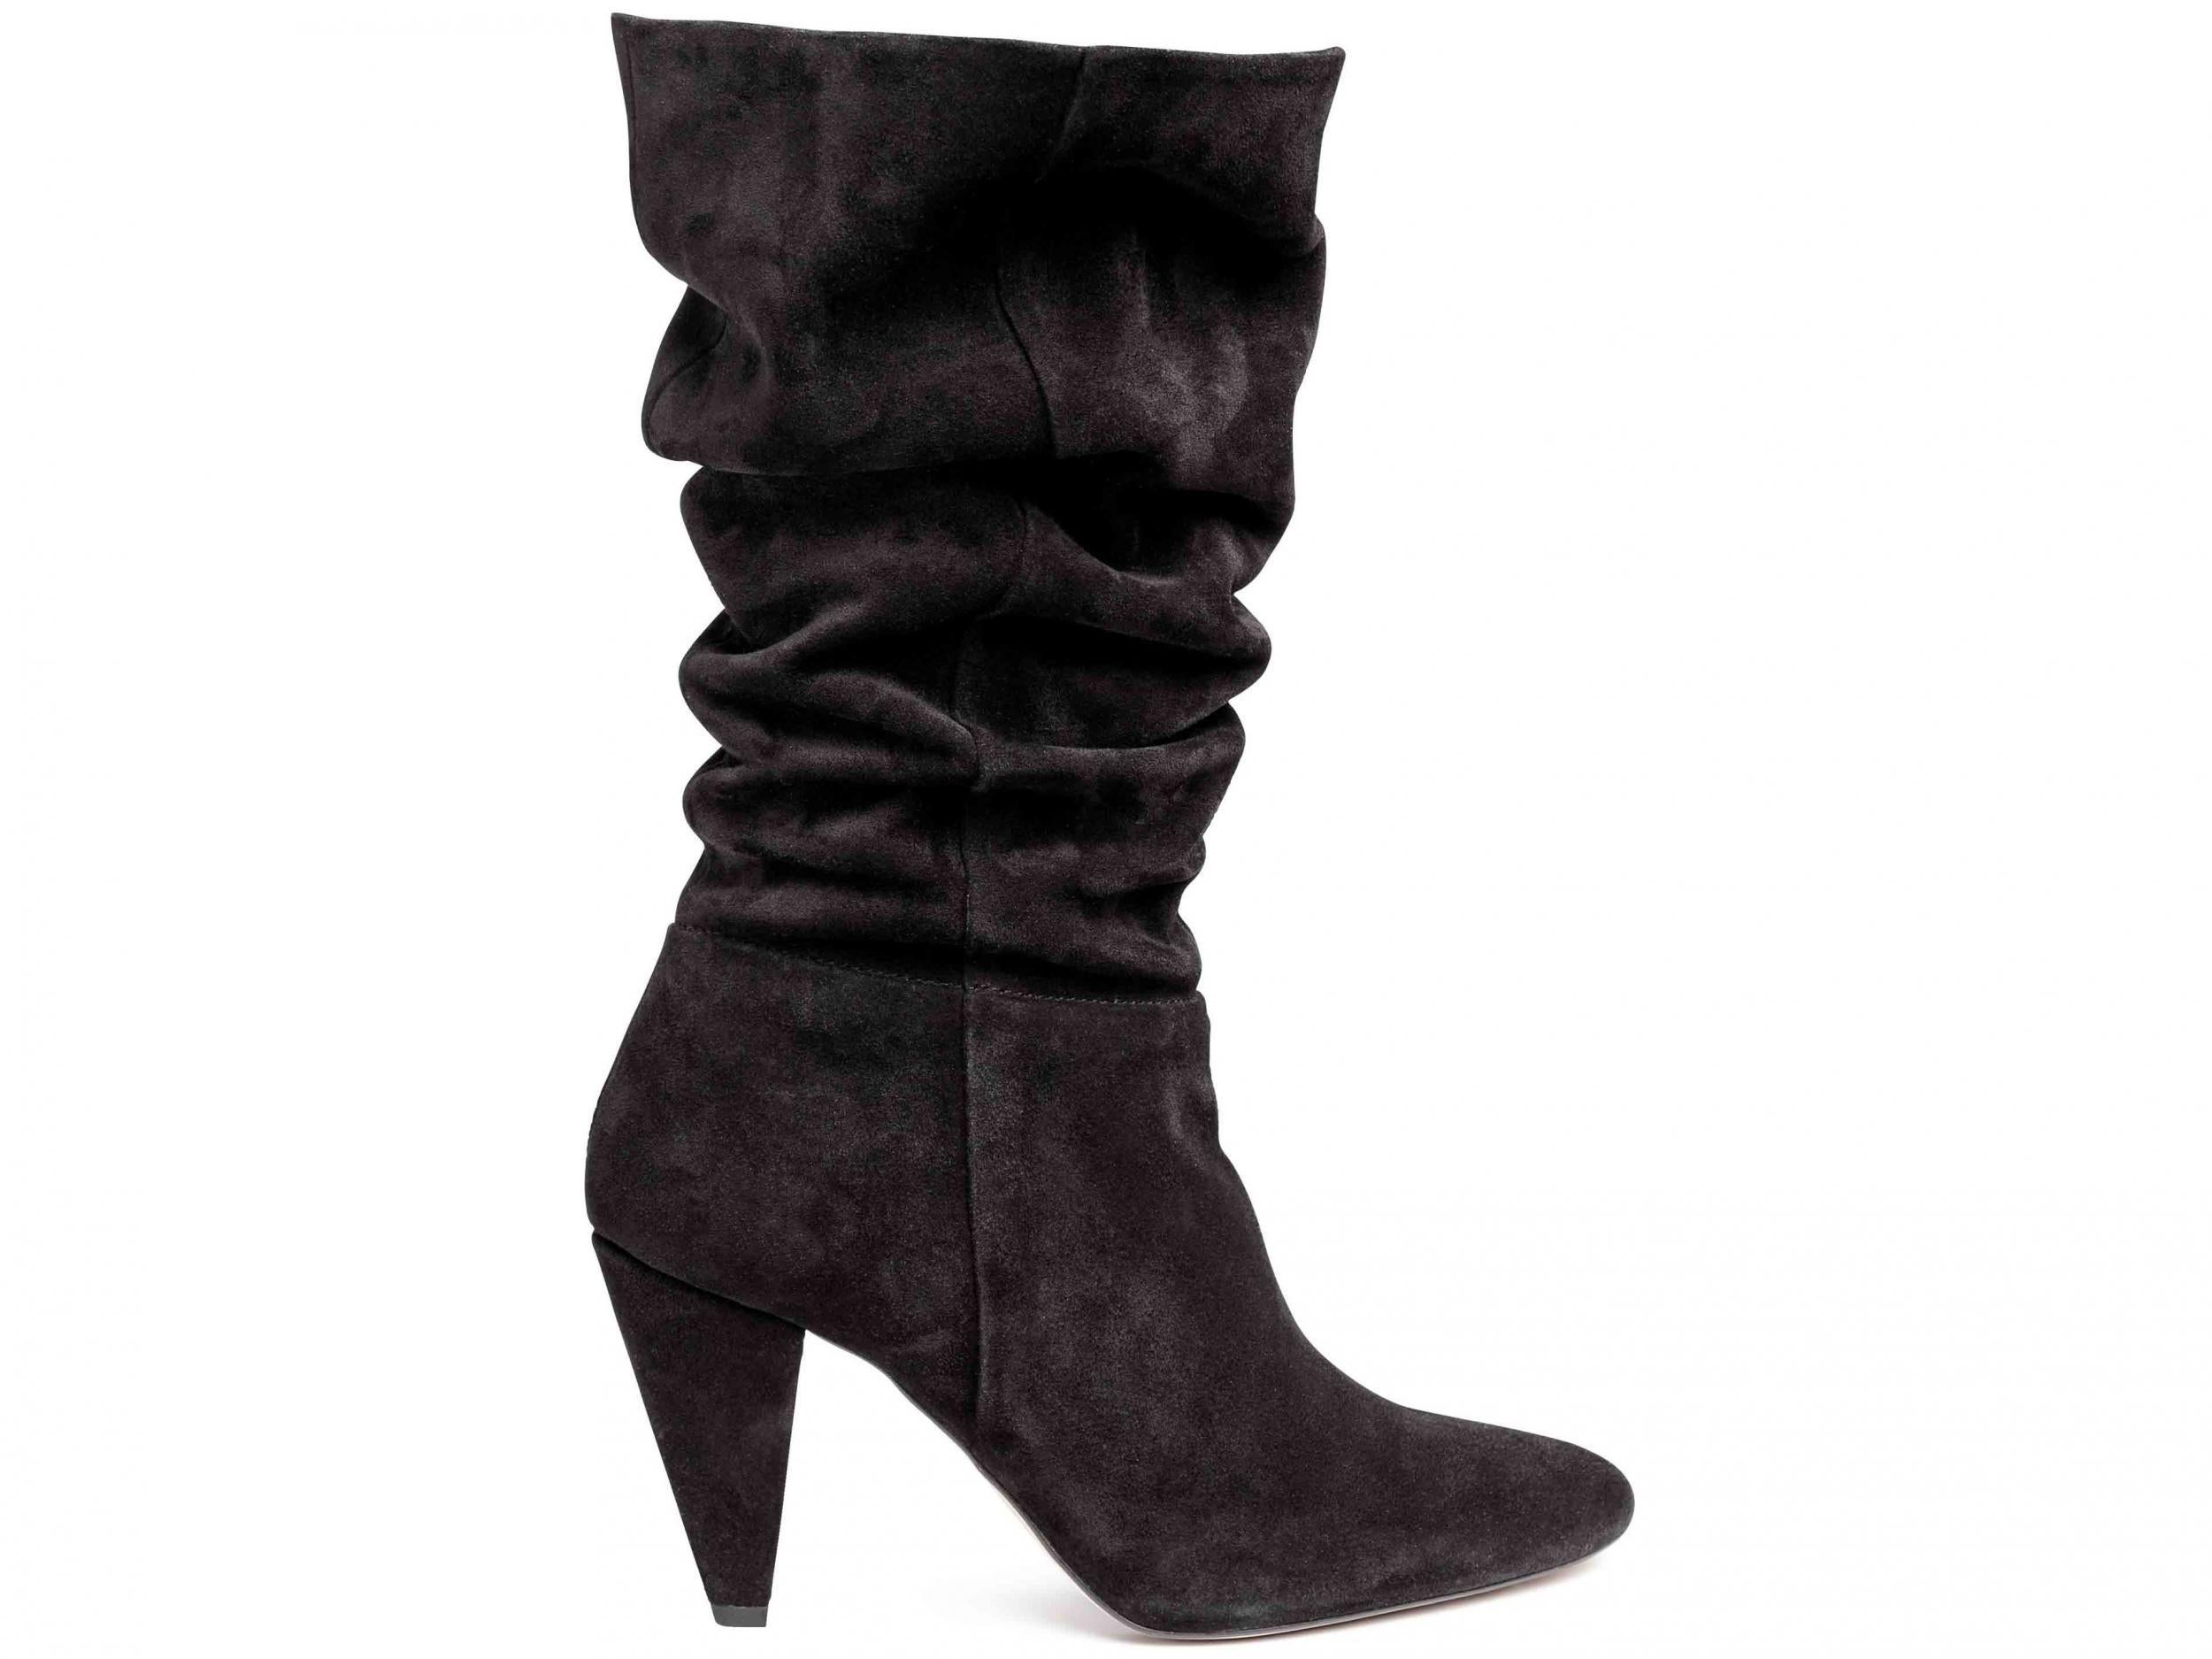 Suede Boots, £79.99, H&amp;M